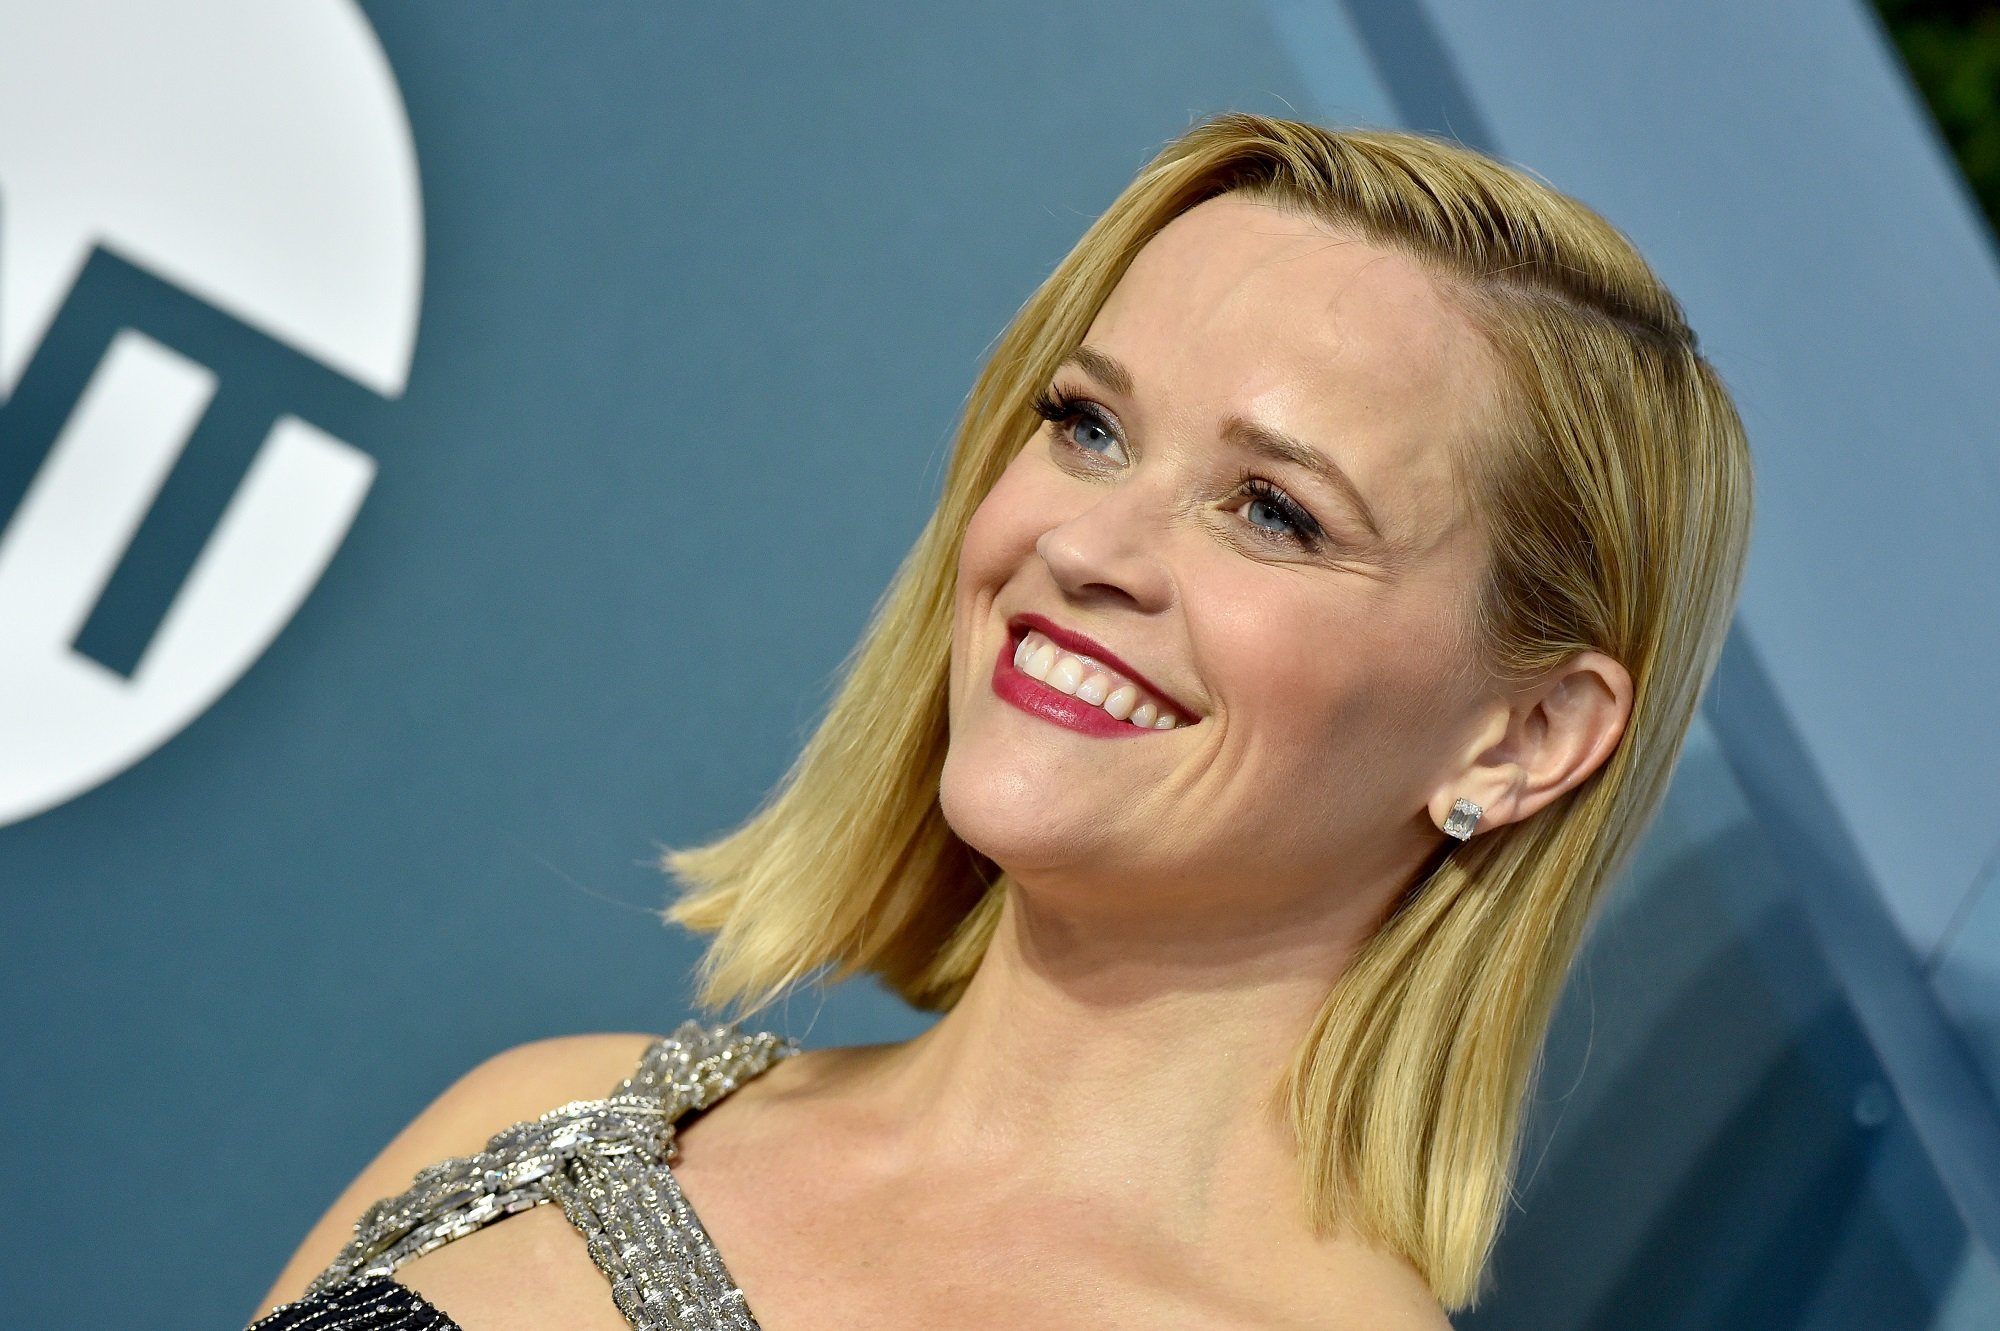 Reese Witherspoon smiling in front of blue/green background